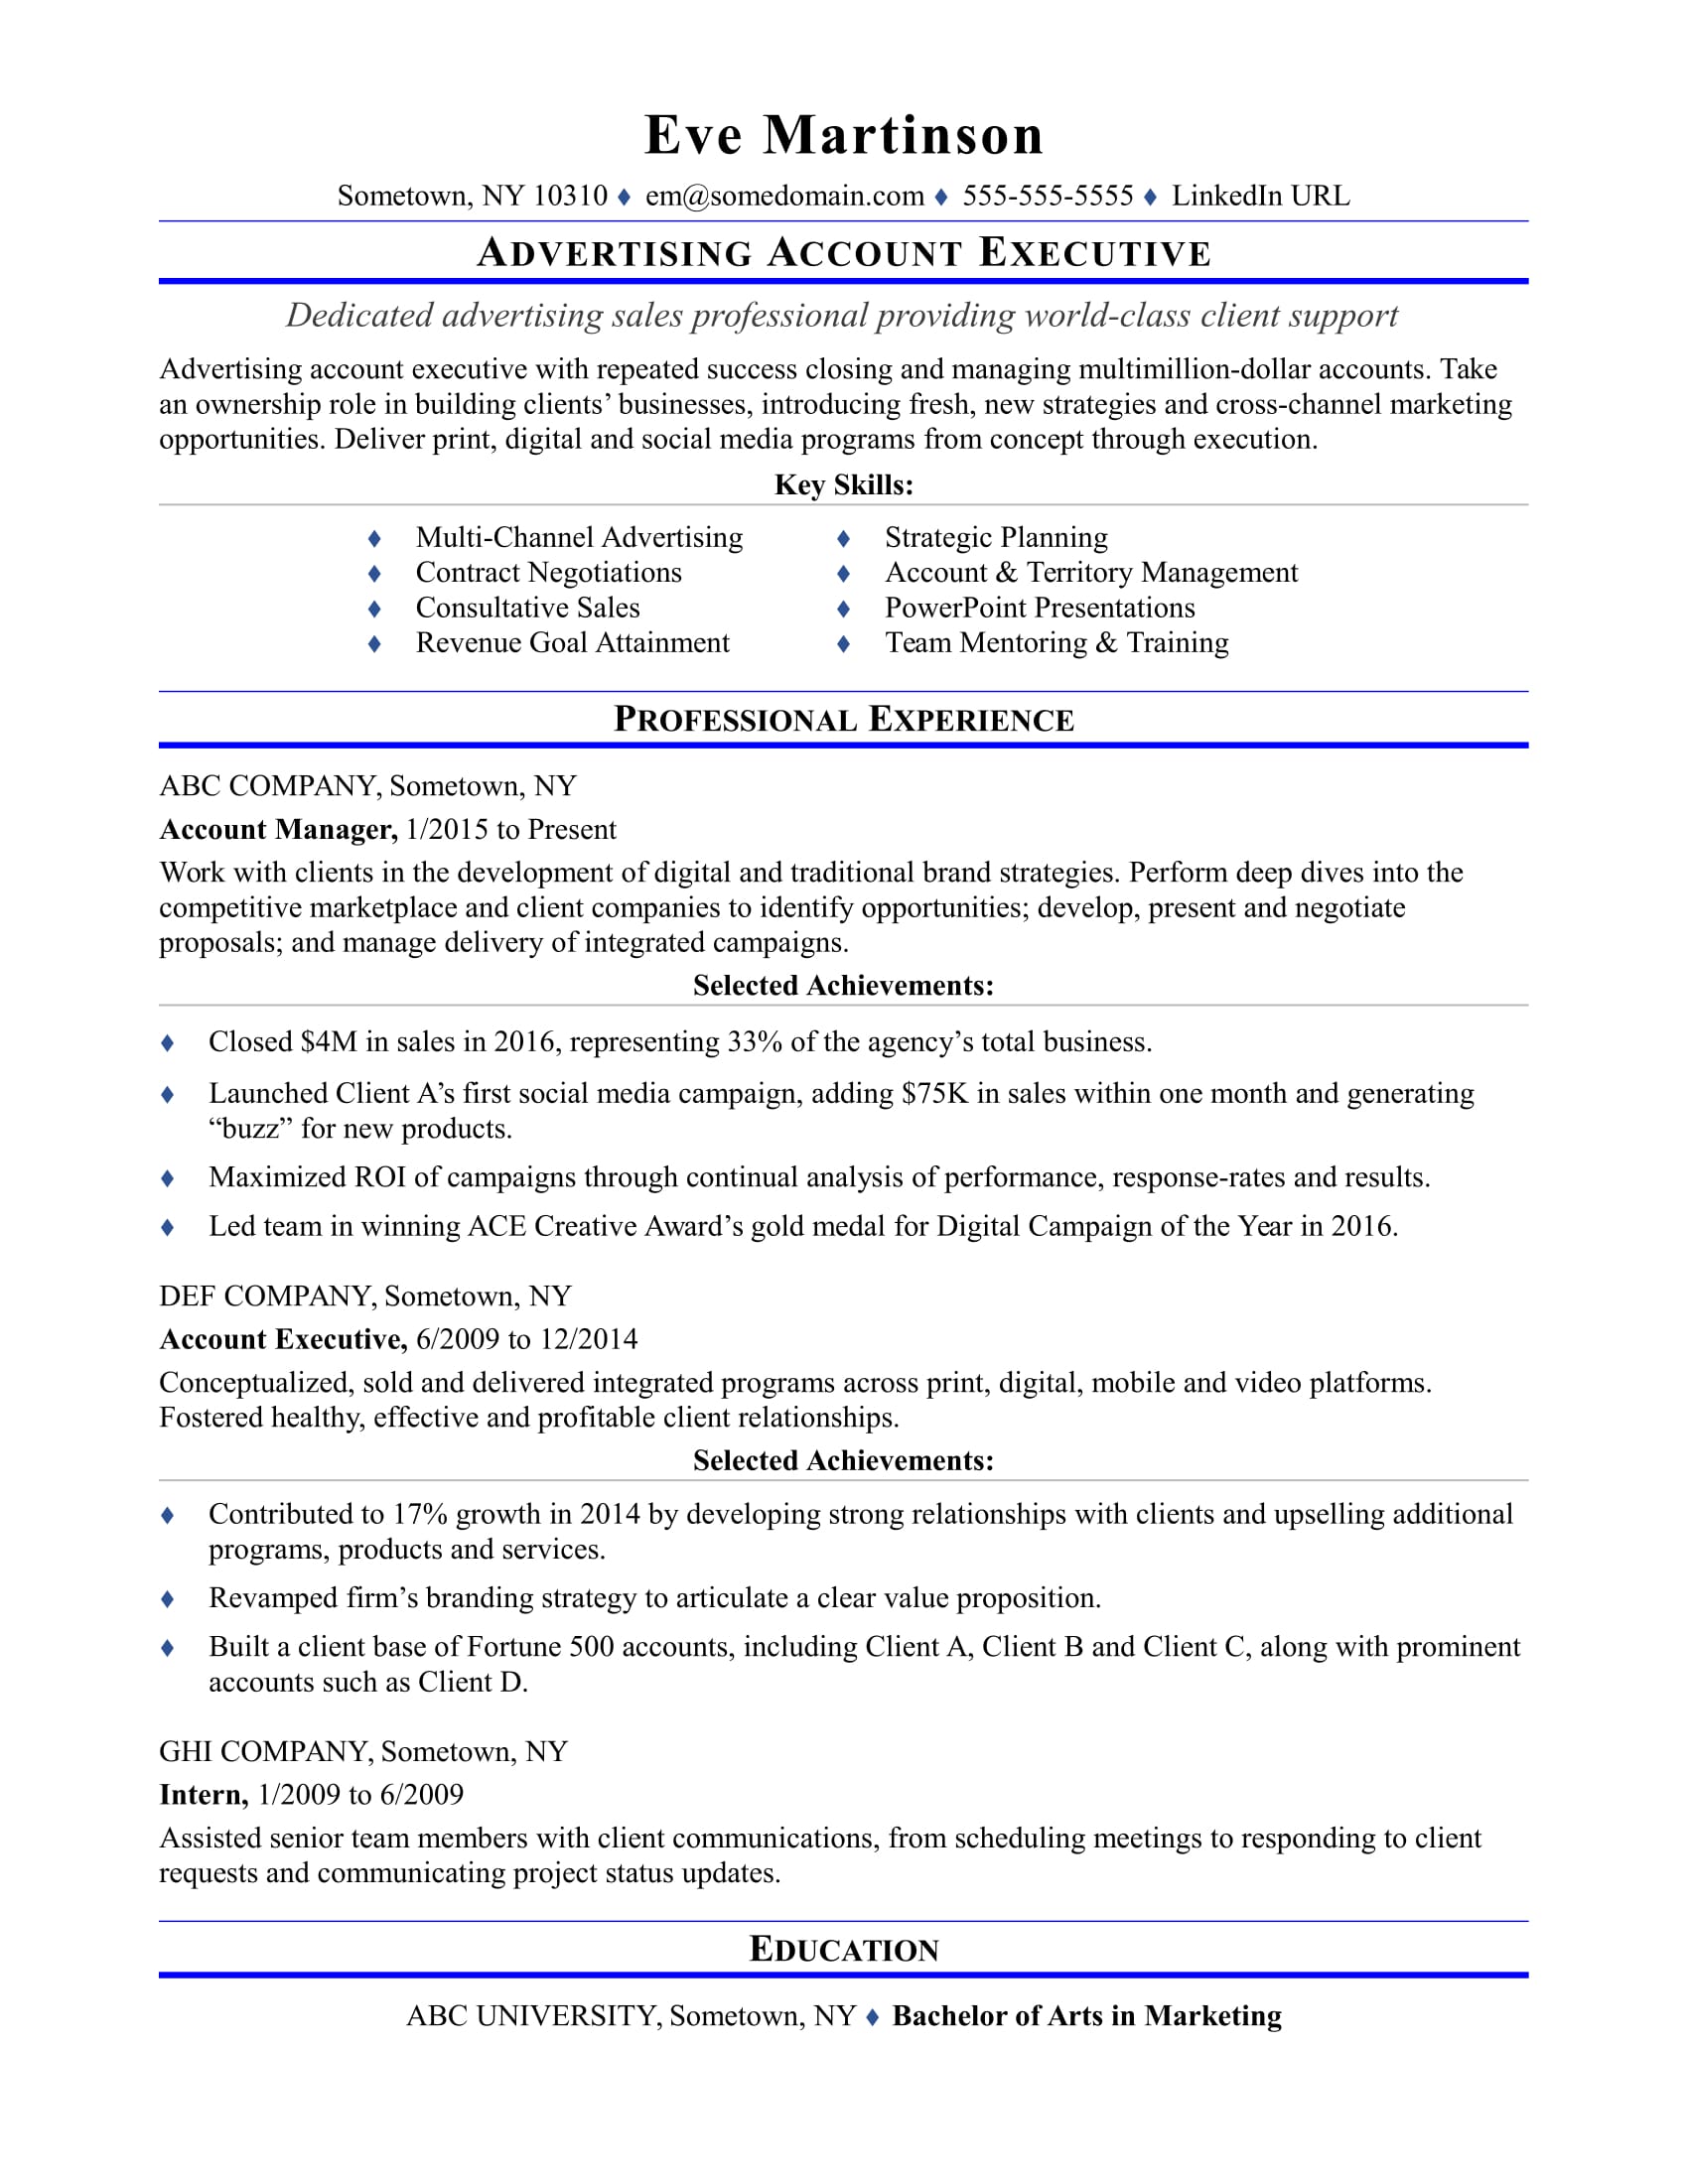 sample resume for an advertising account executive monster com